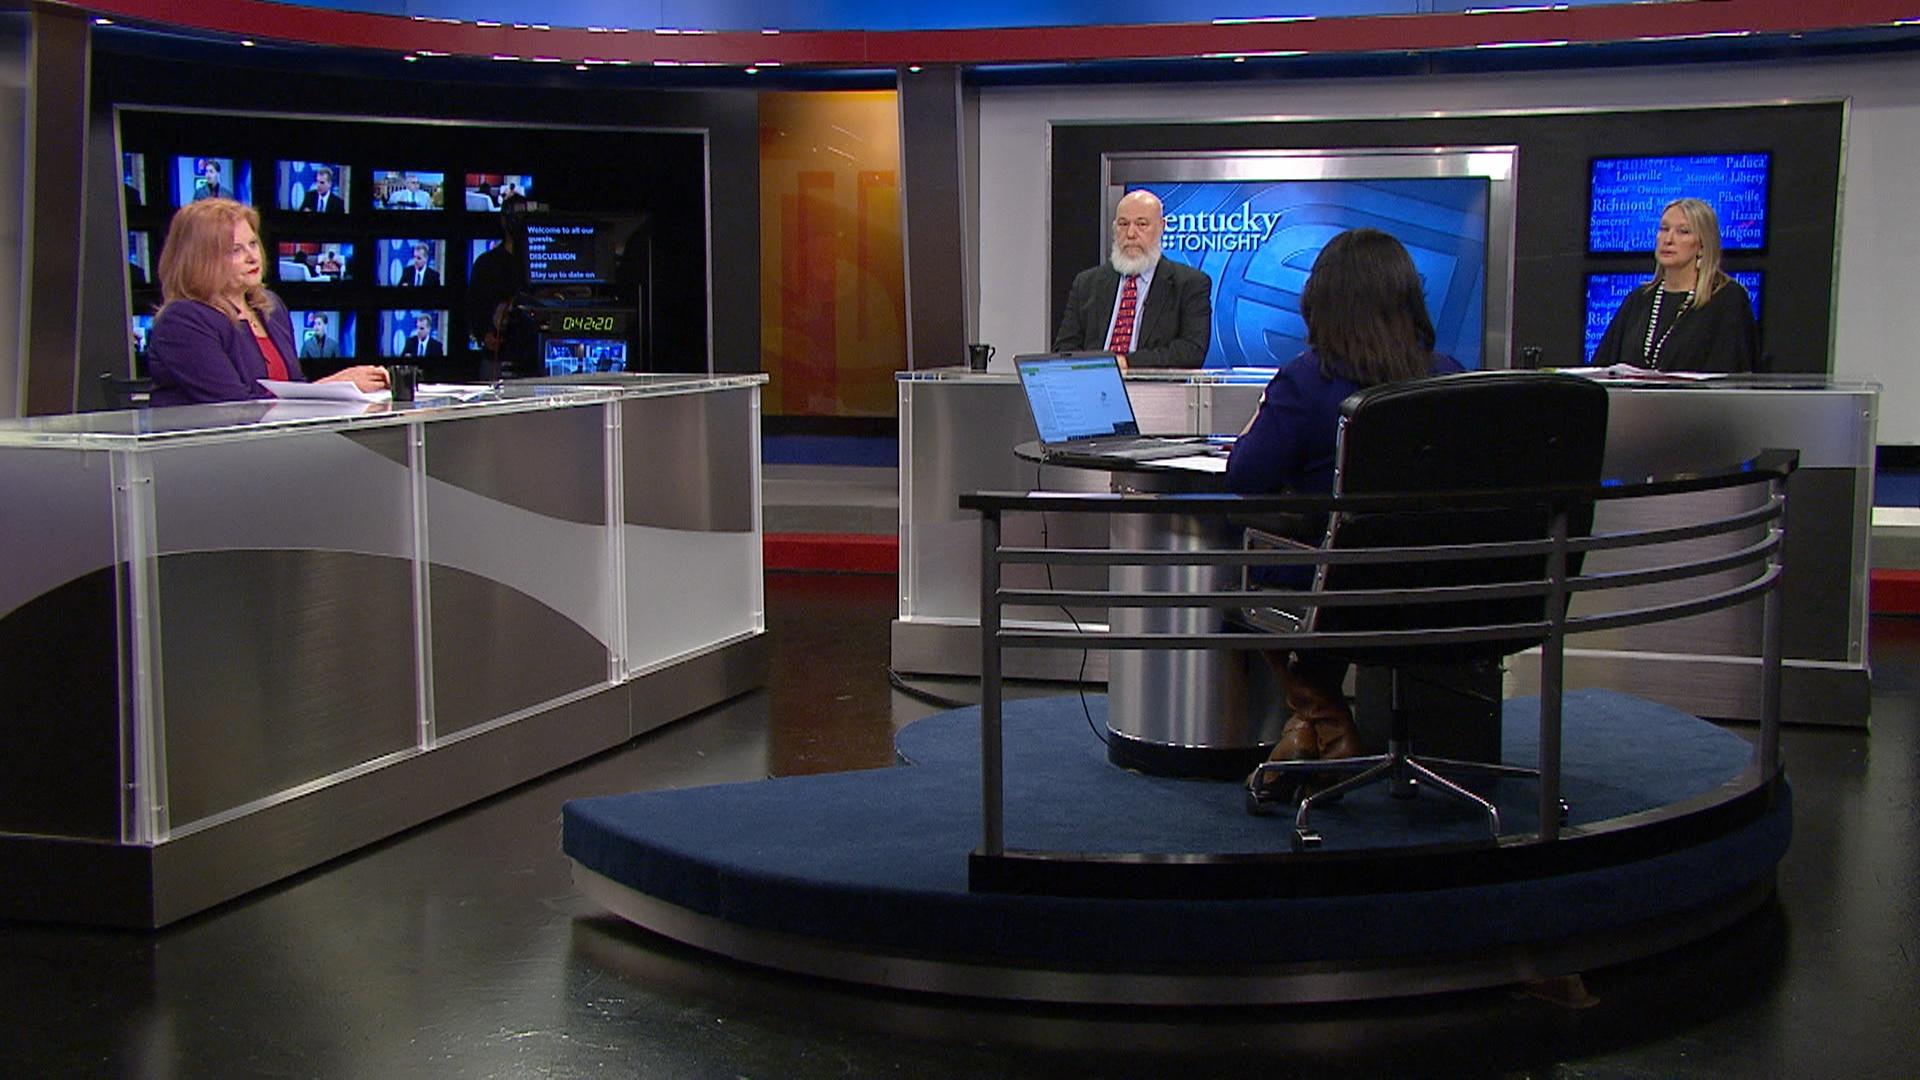 Three guests sit at desks in front of host, Renee Shaw, whose back is to the camera